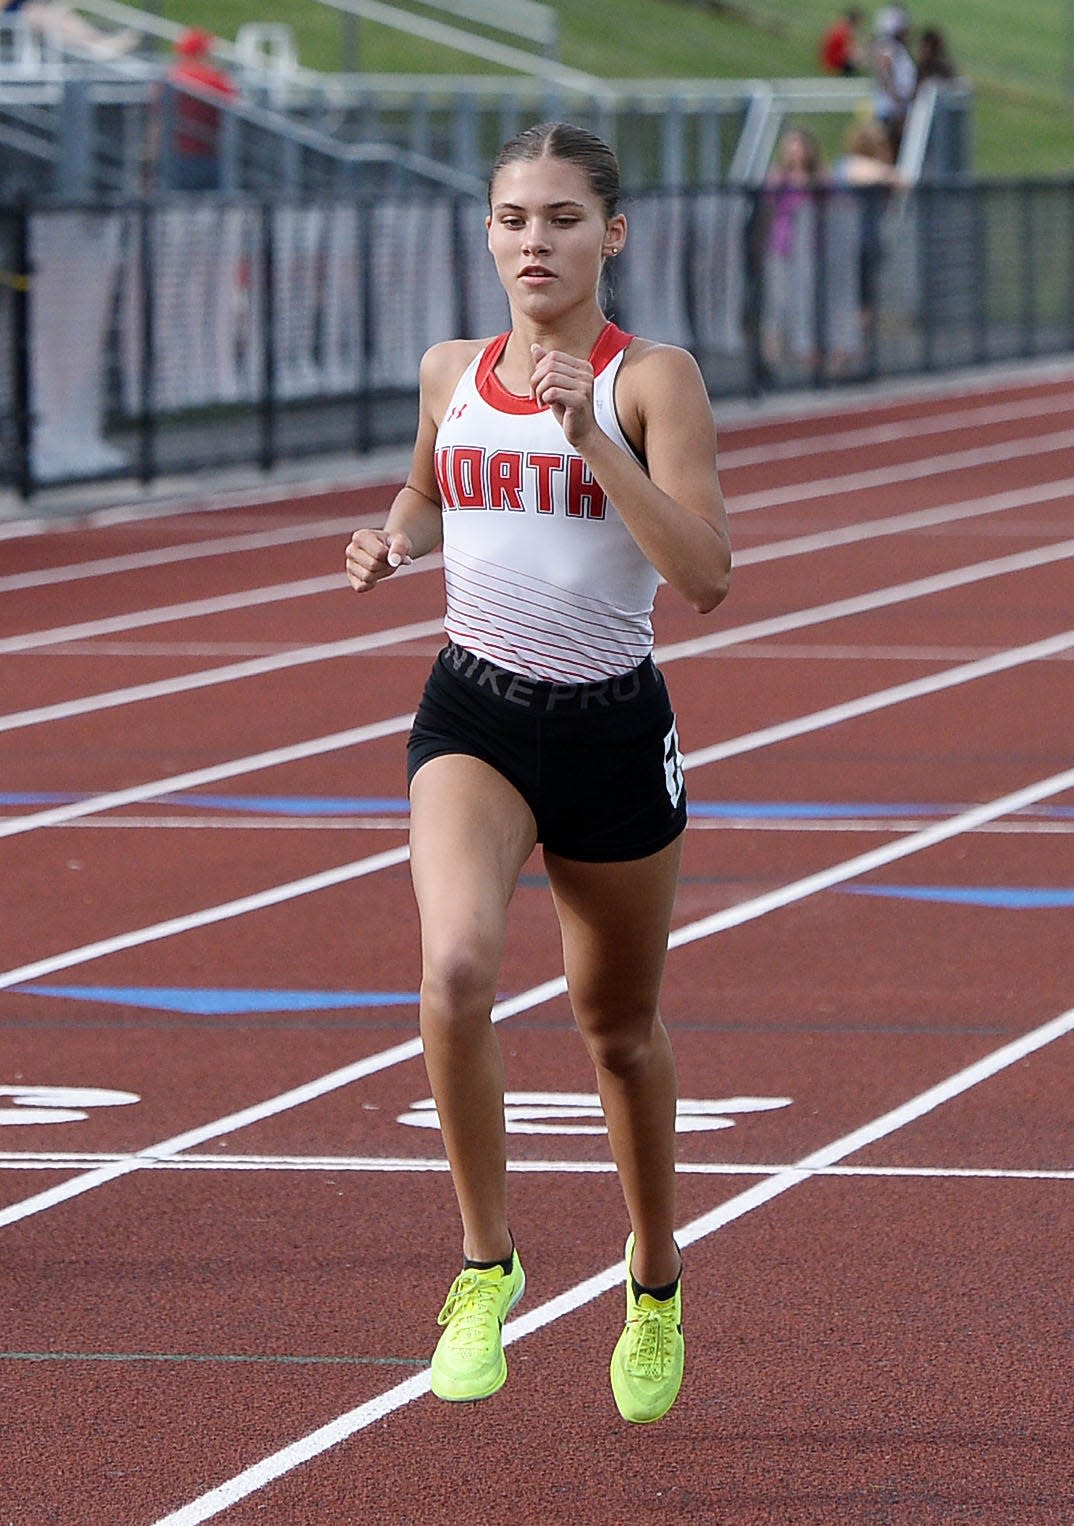 North Hagerstown's Lauren Stine leads the girls 1,600-meter run during the Washington County Track & Field Championships. Stine won the race in a personal-best time of 5:03.60.